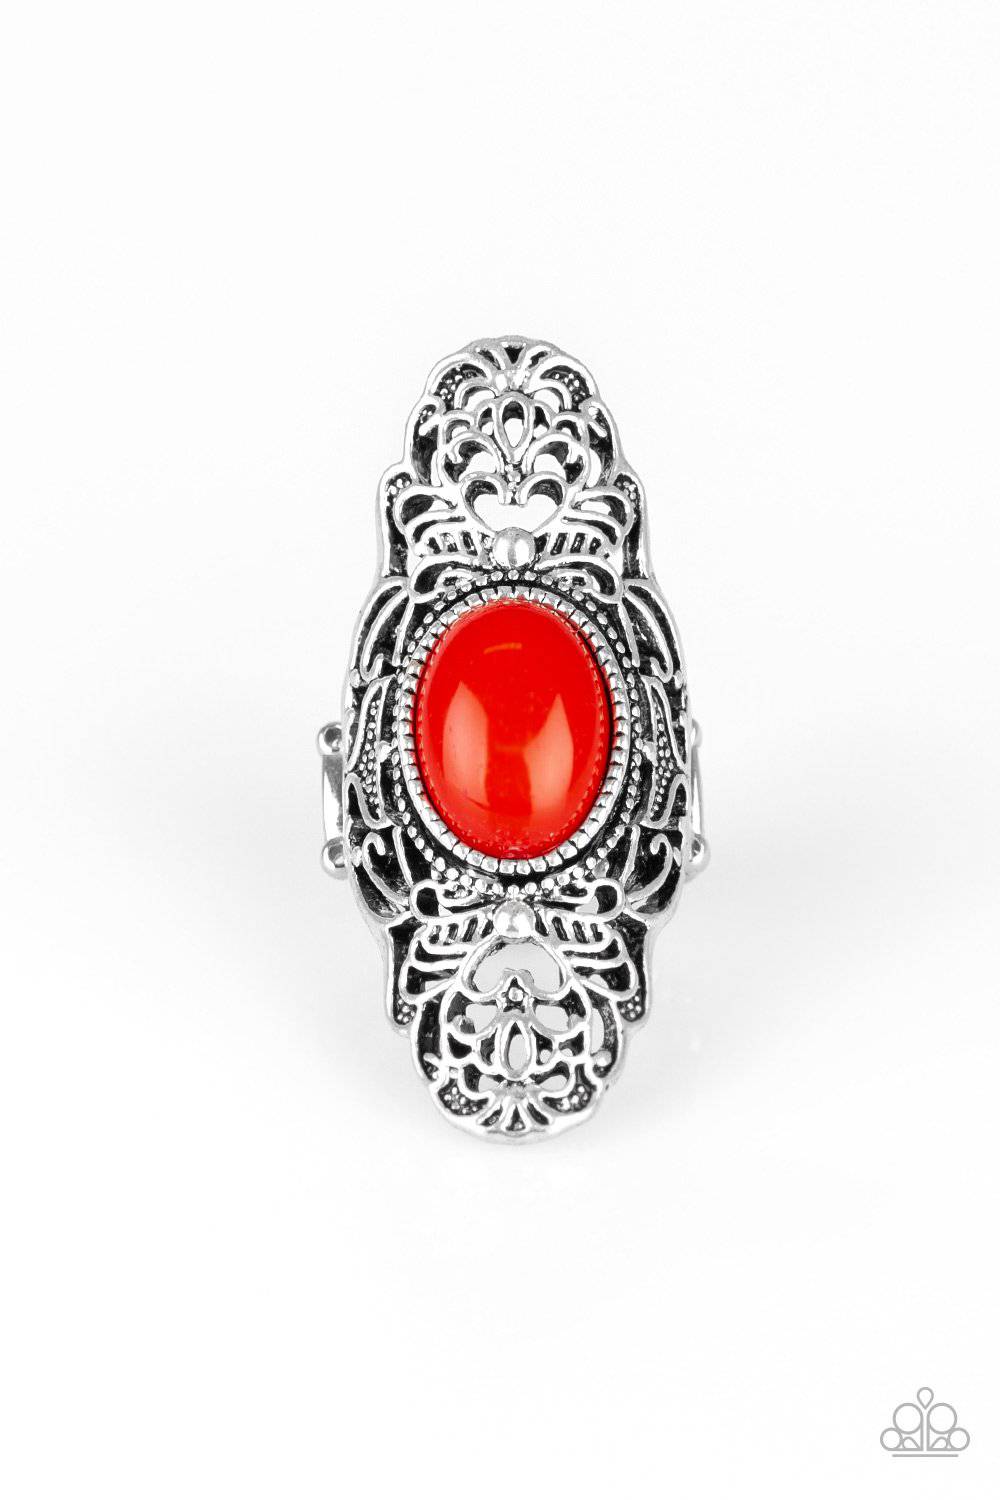 C117 - Flair for the Dramatic, Paparazzi Red Ring by Paparazzi Accessories on Fancy5Fashion.com